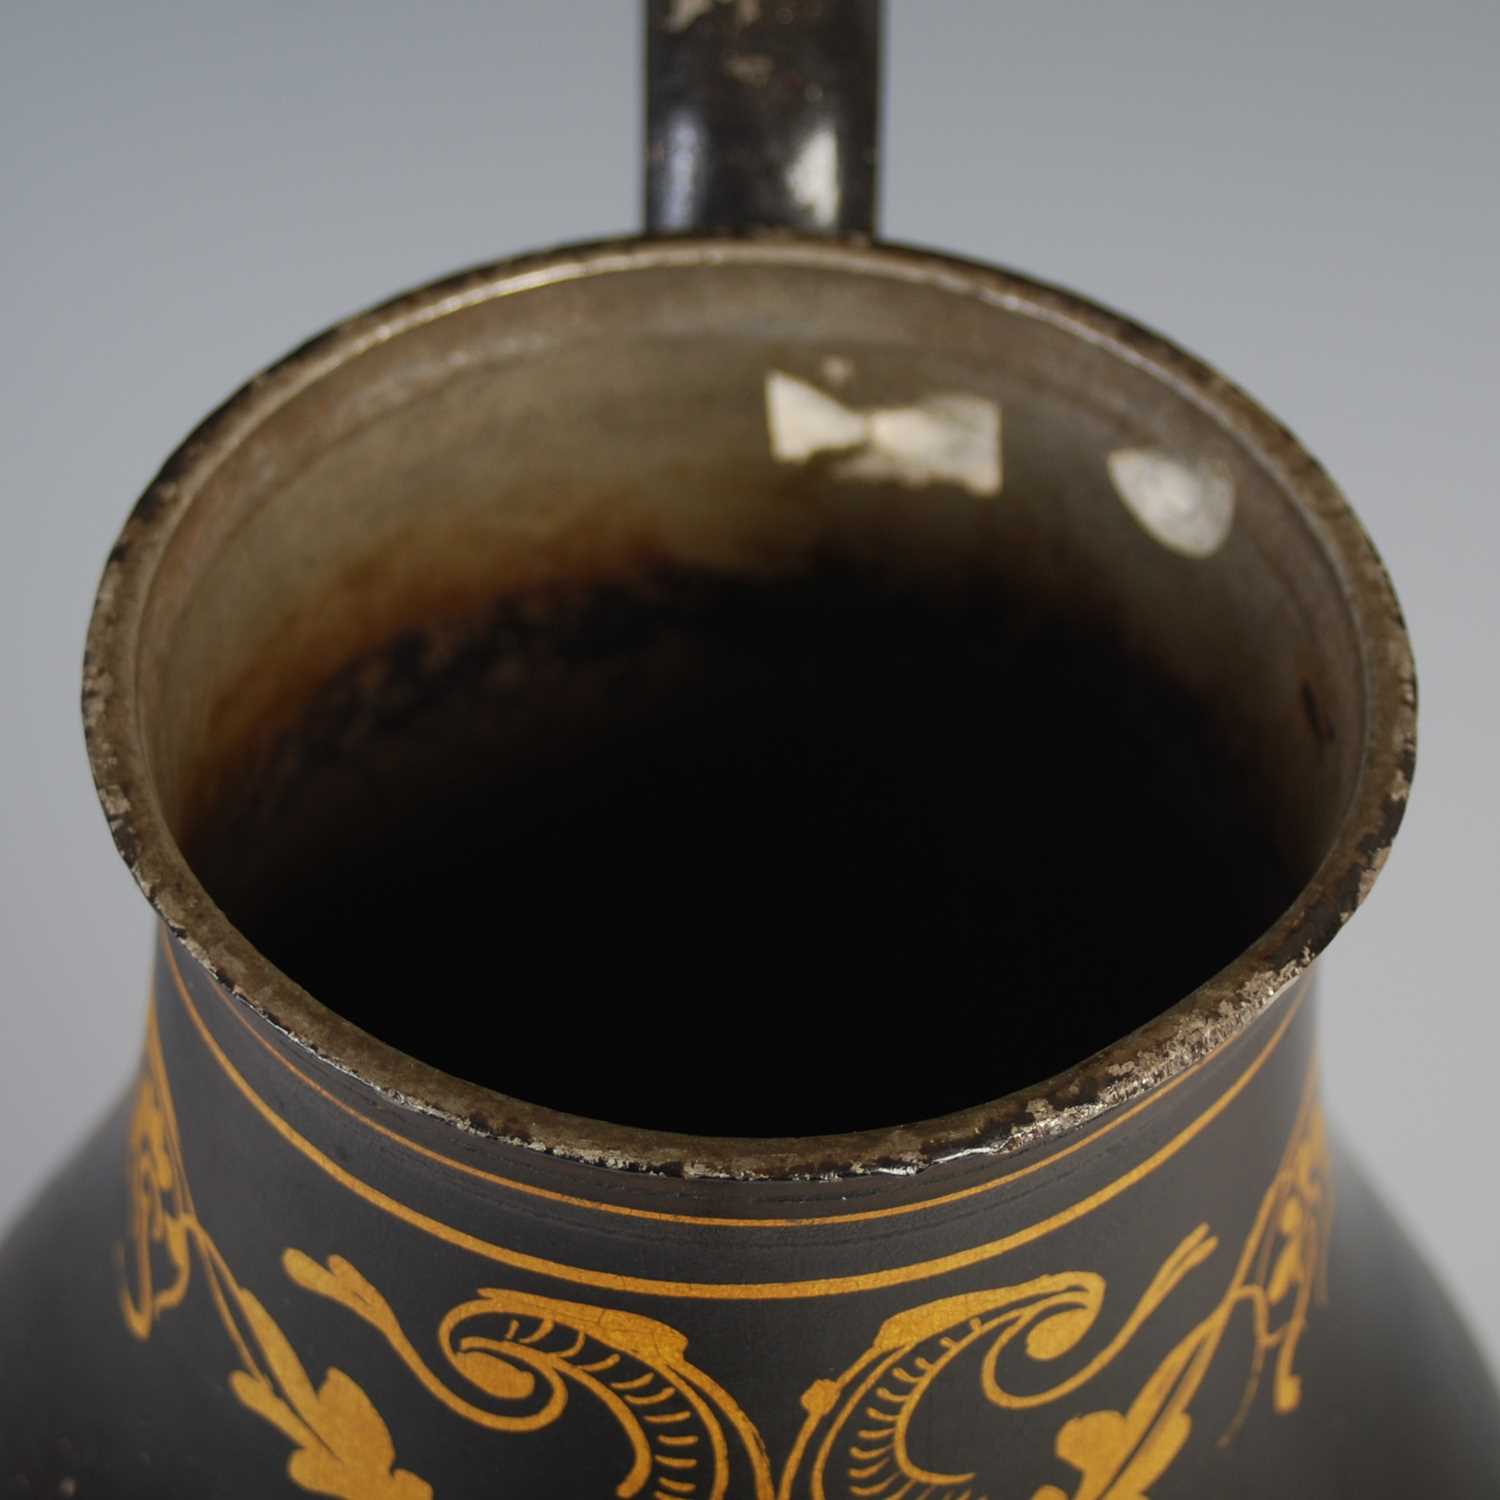 An 18th century Dutch lacquered pewter coffee pot and stand, the coffee pot with detachable cover - Image 6 of 8